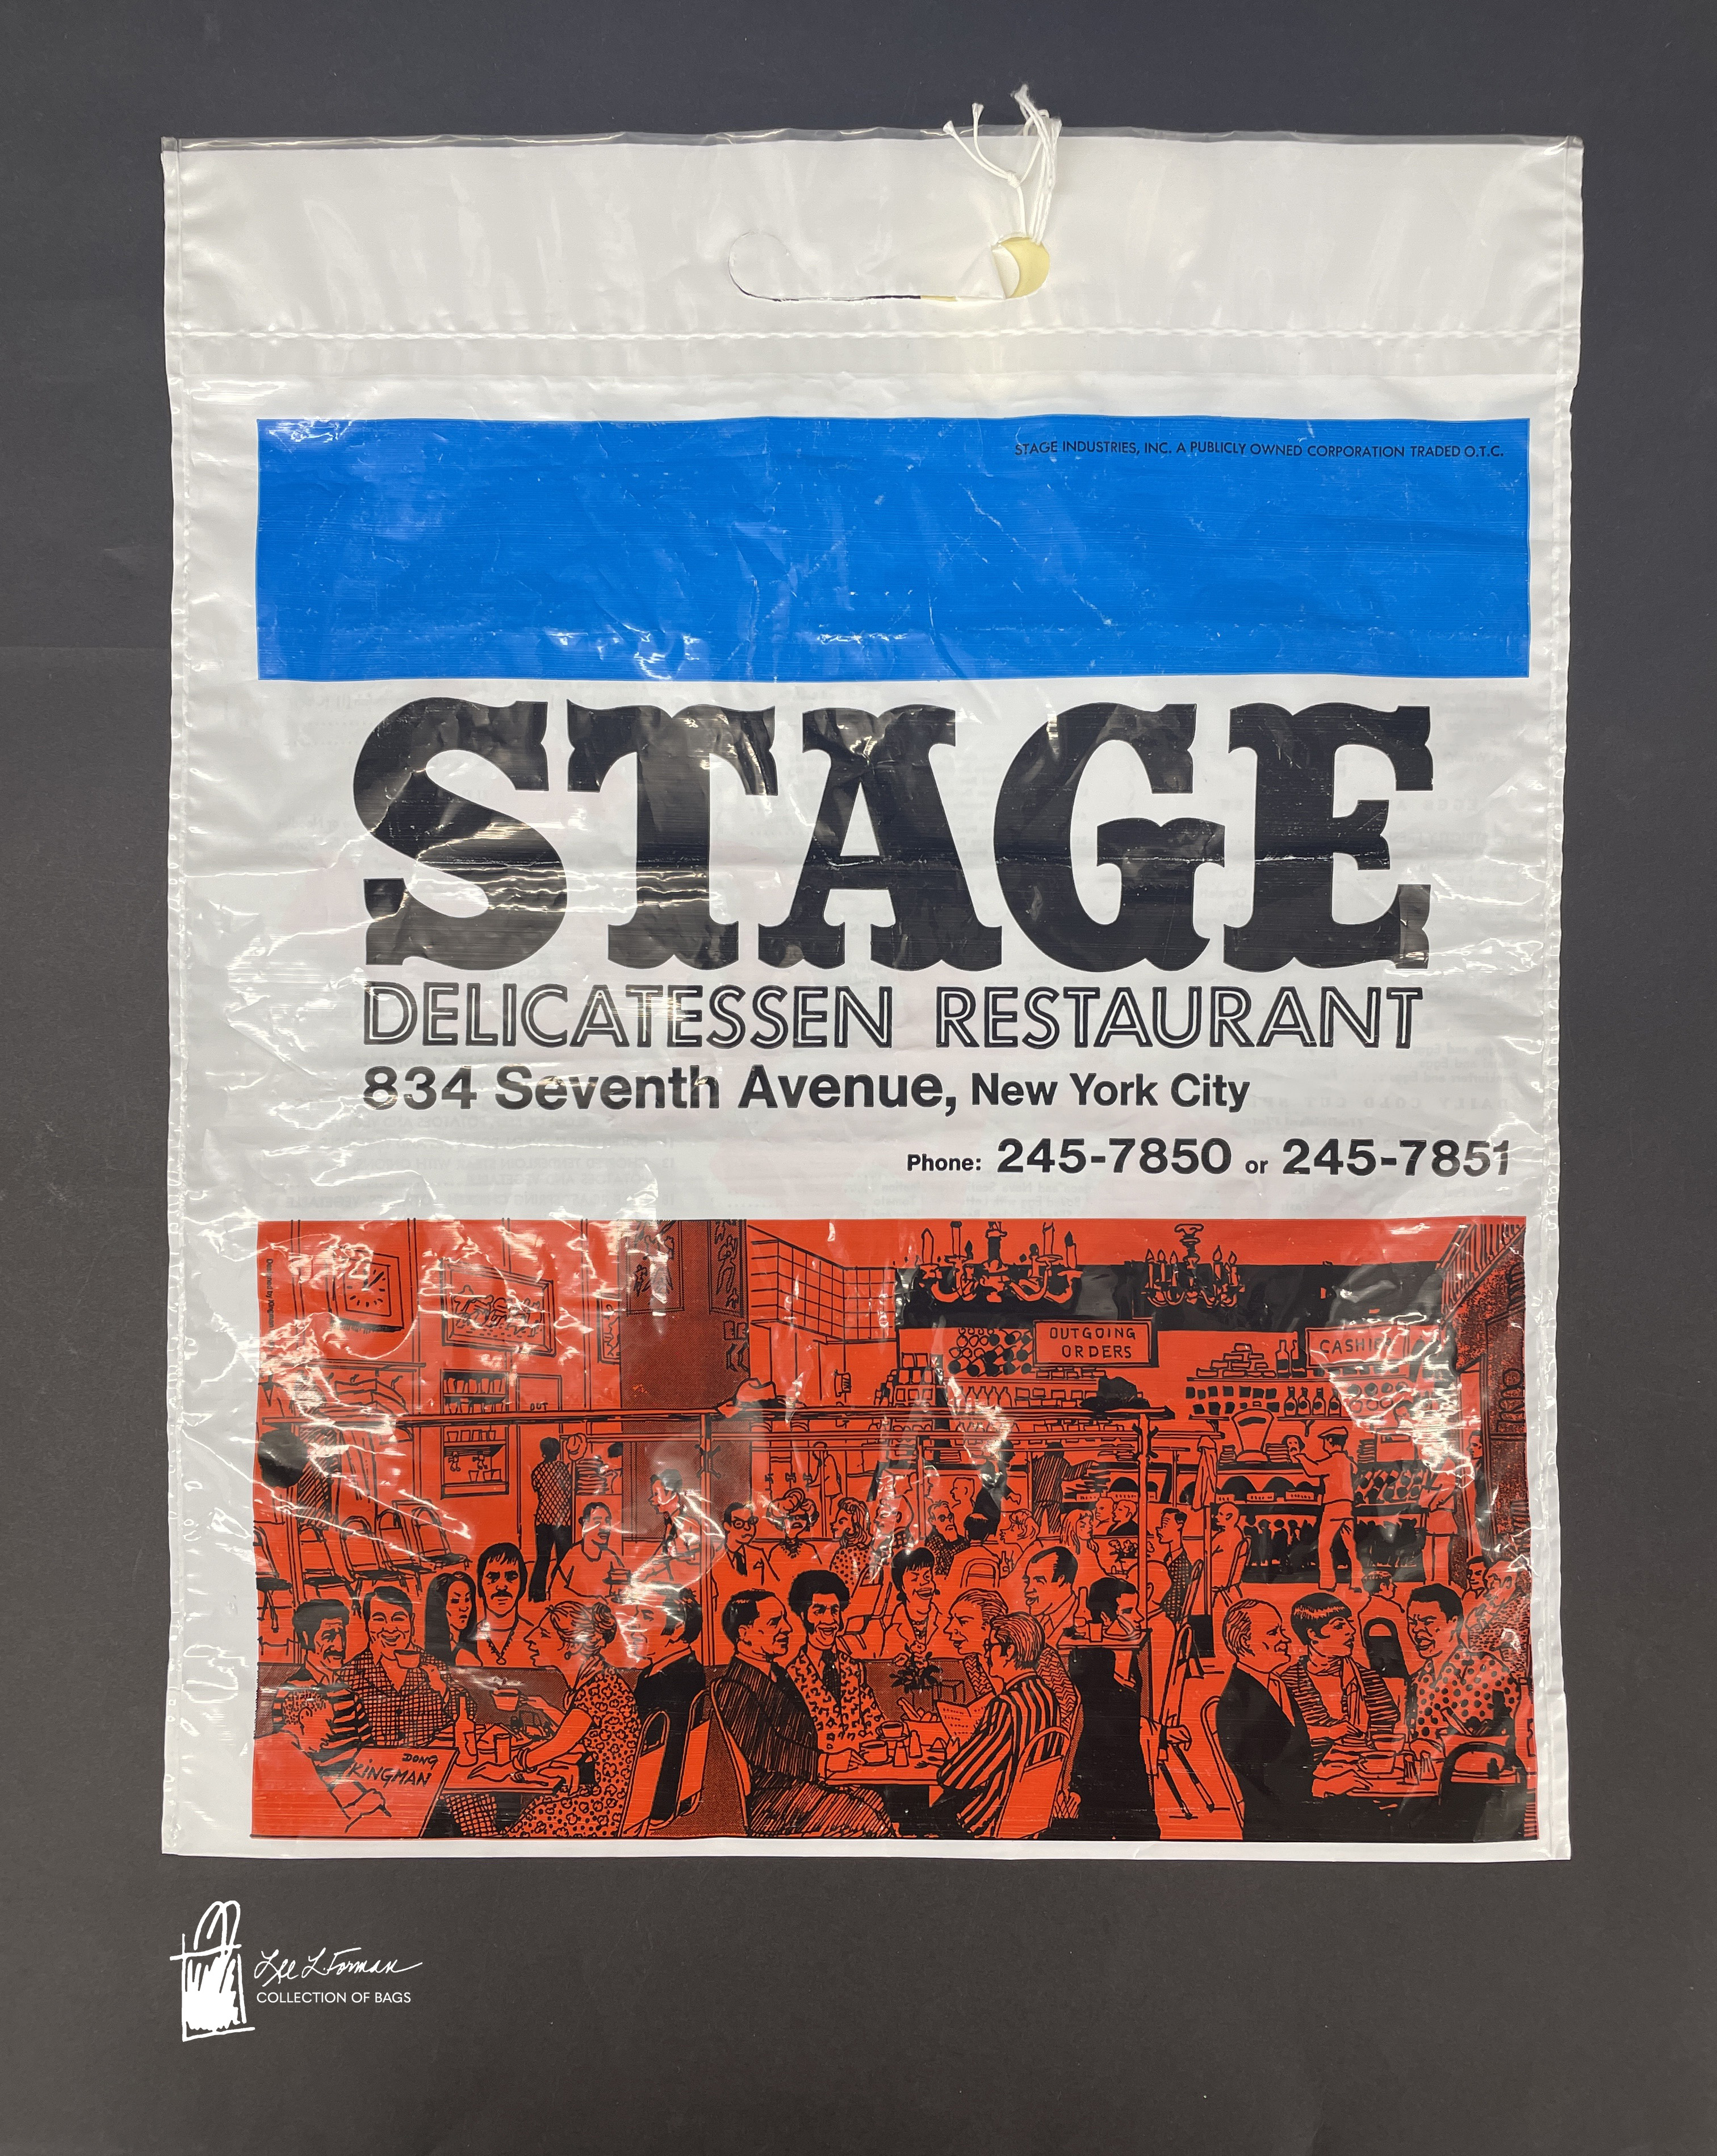 190/365: The Stage Deli was in operation for 75 years on Seventh Avenue in New York City, just two blocks from Carnegie Hall. Known for its Broadway-themed specials, the deli was opened in 1937 by Russian immigrant Max Asnas. 